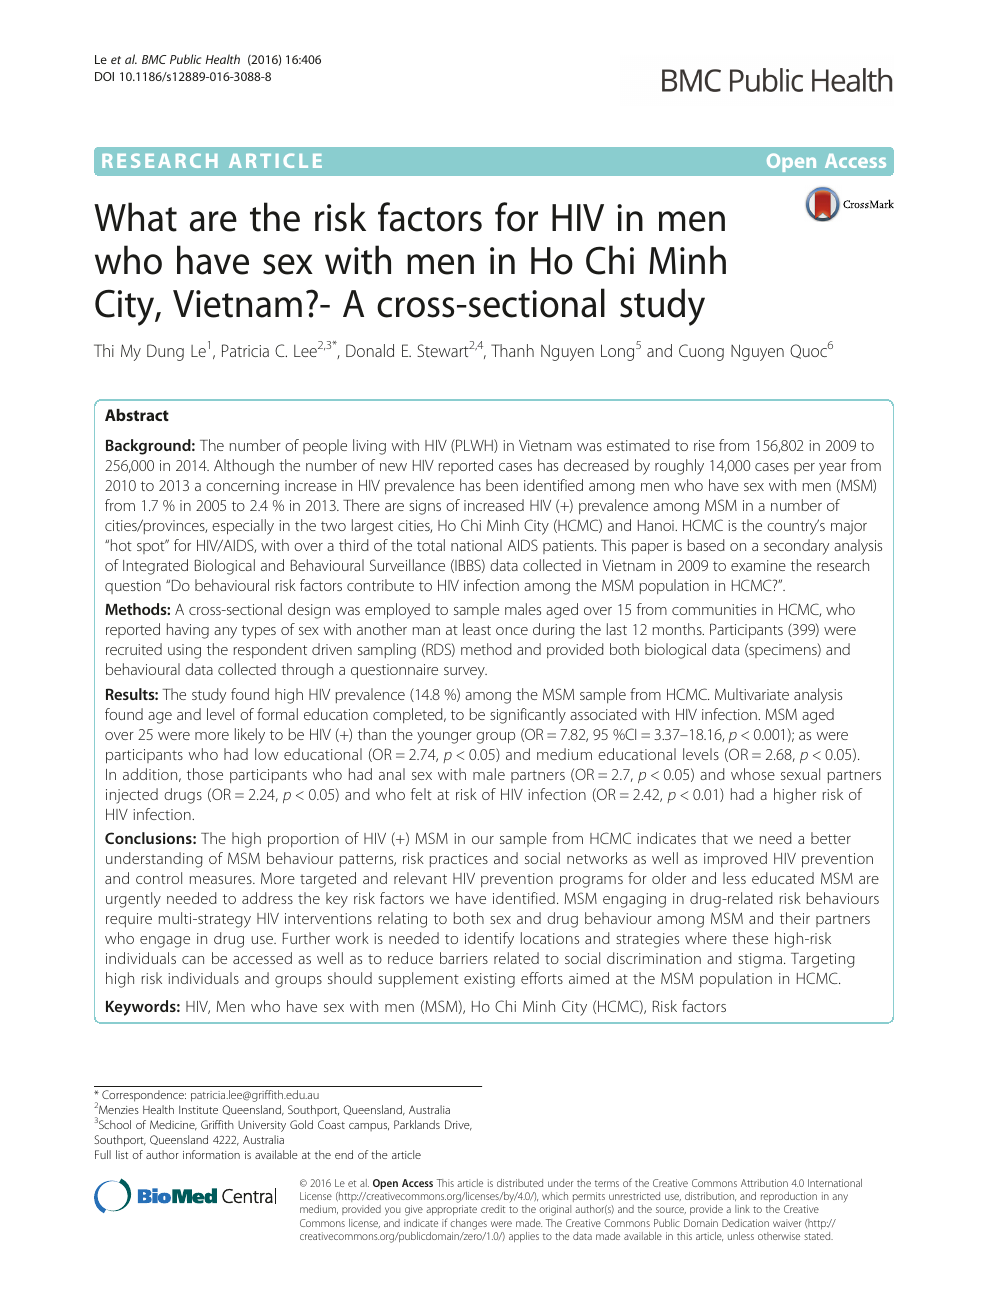 What are the risk factors for HIV in men who have sex with men in Ho Chi Minh City, Vietnam?- A cross-sectional study